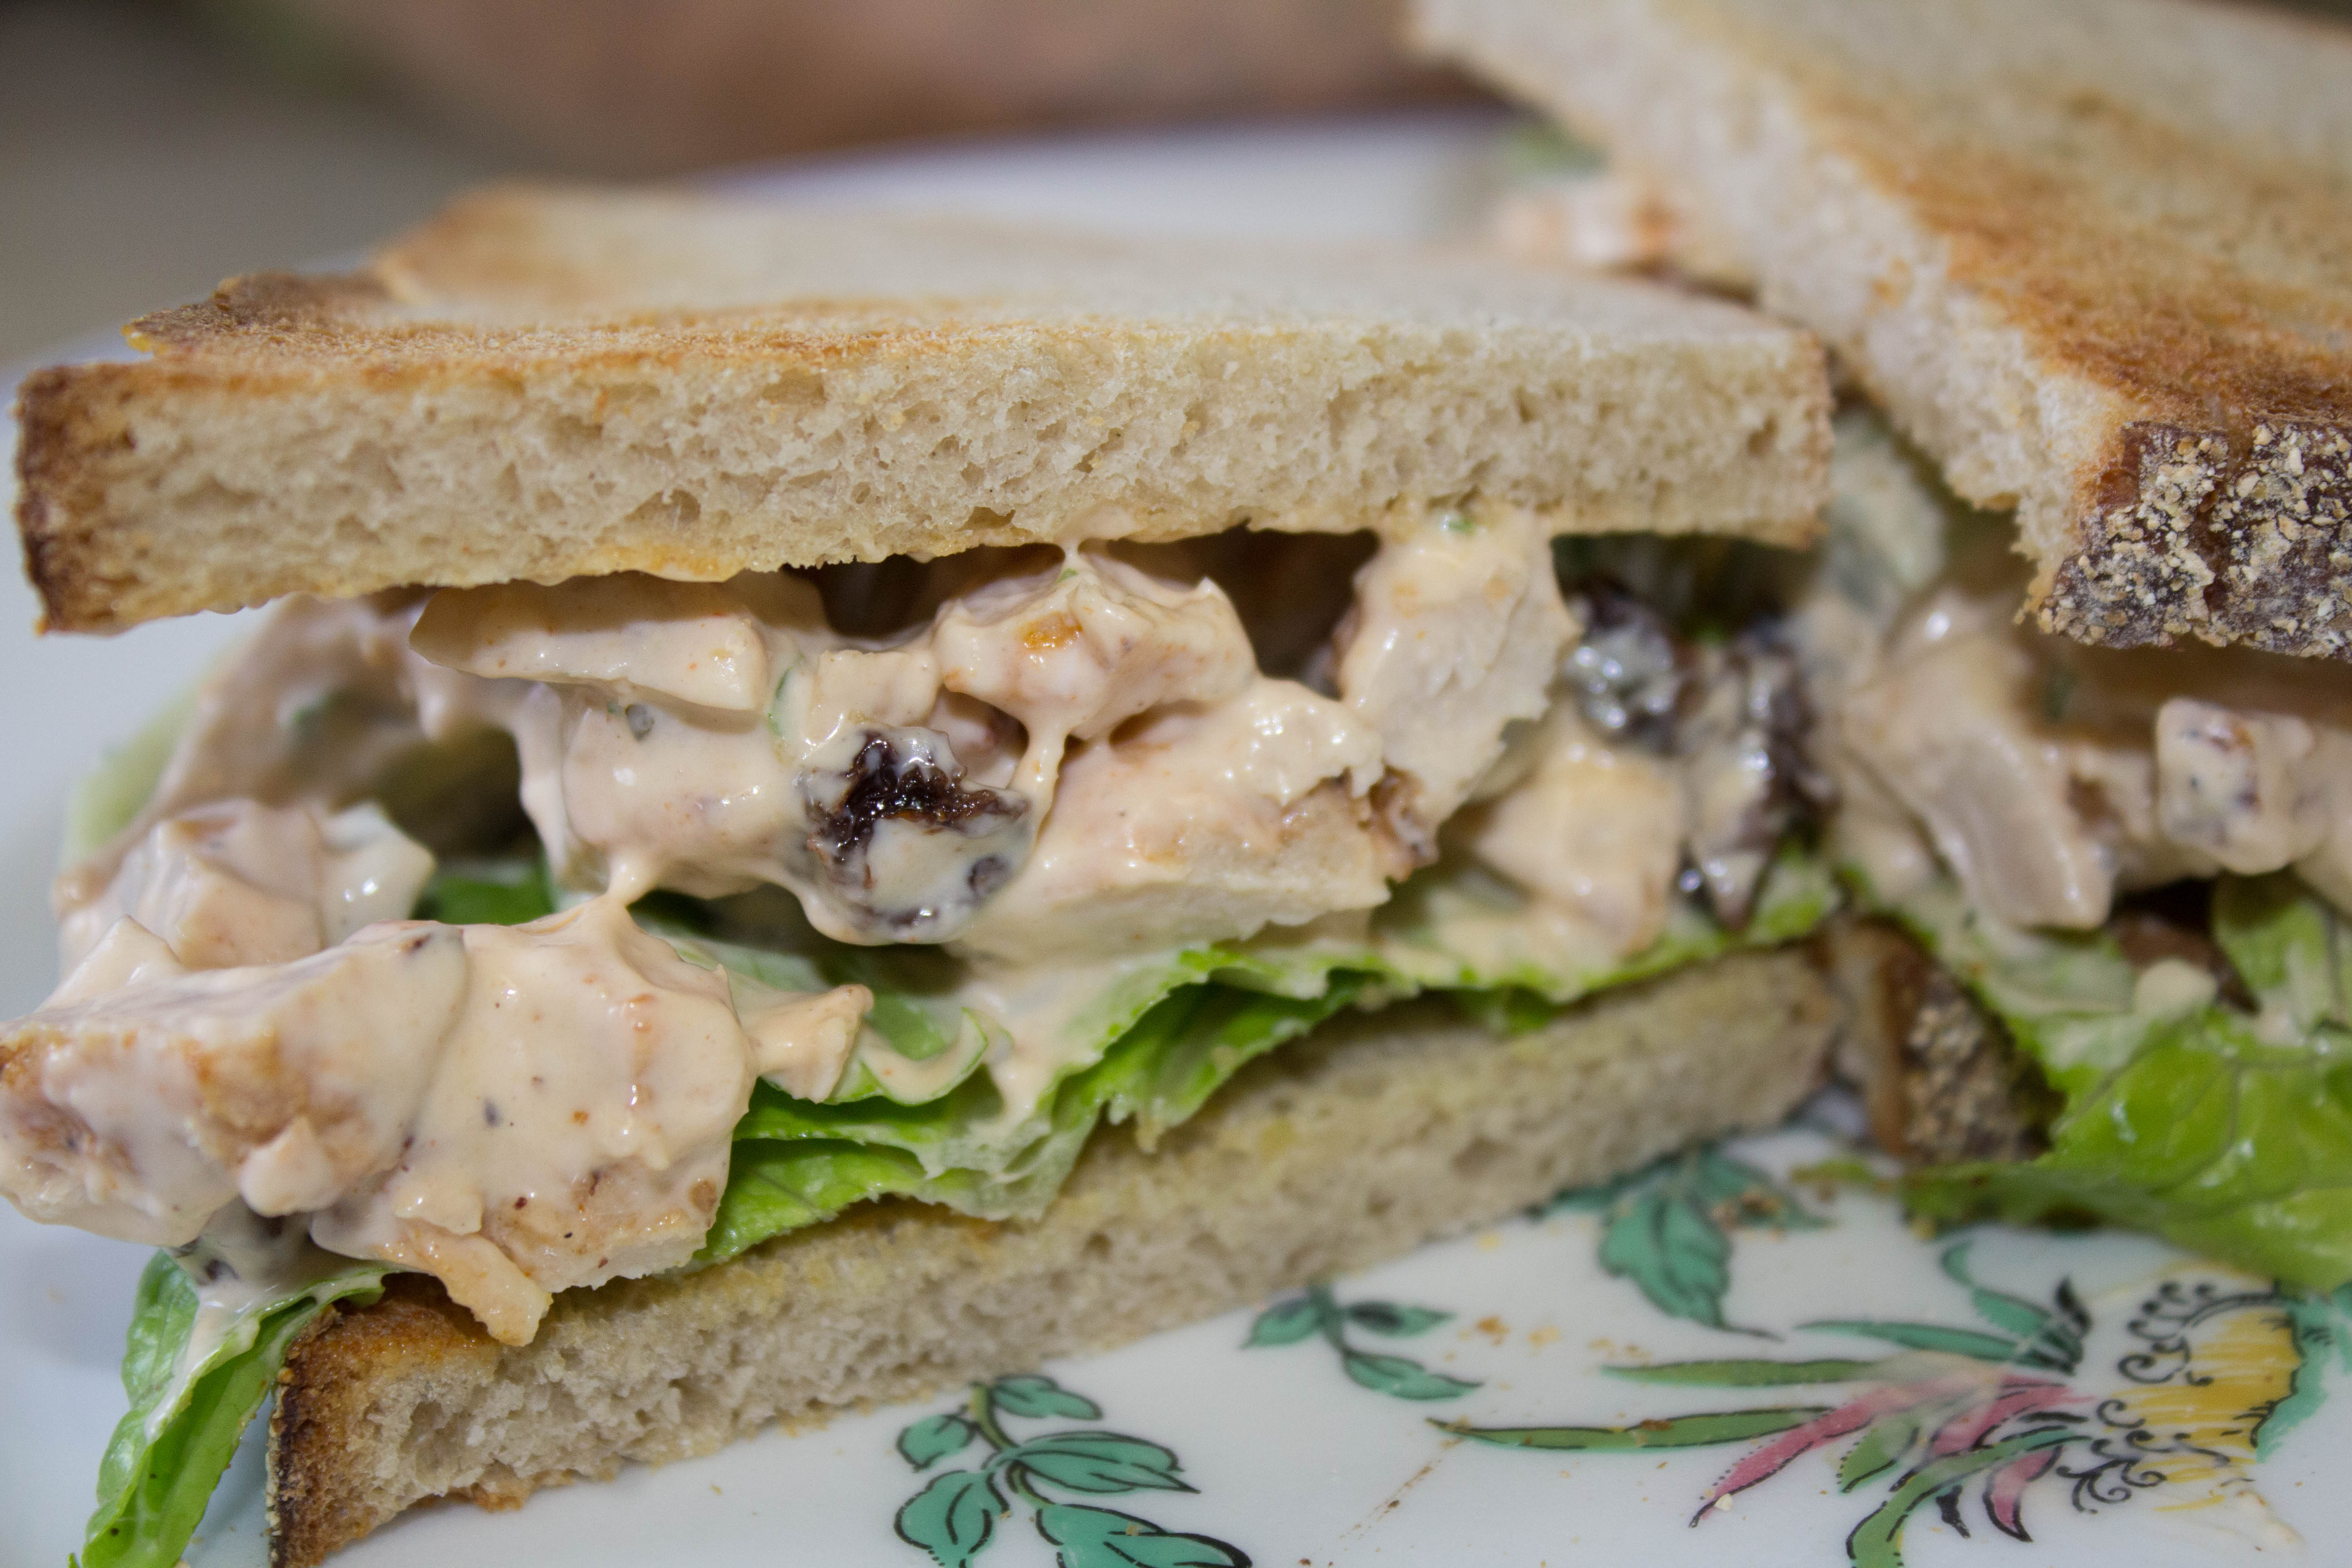 Looking for a great tasting, easy chicken salad recipe? This kicking spicy chicken salad recipe will be hit for lunch, dinner or a picnic.